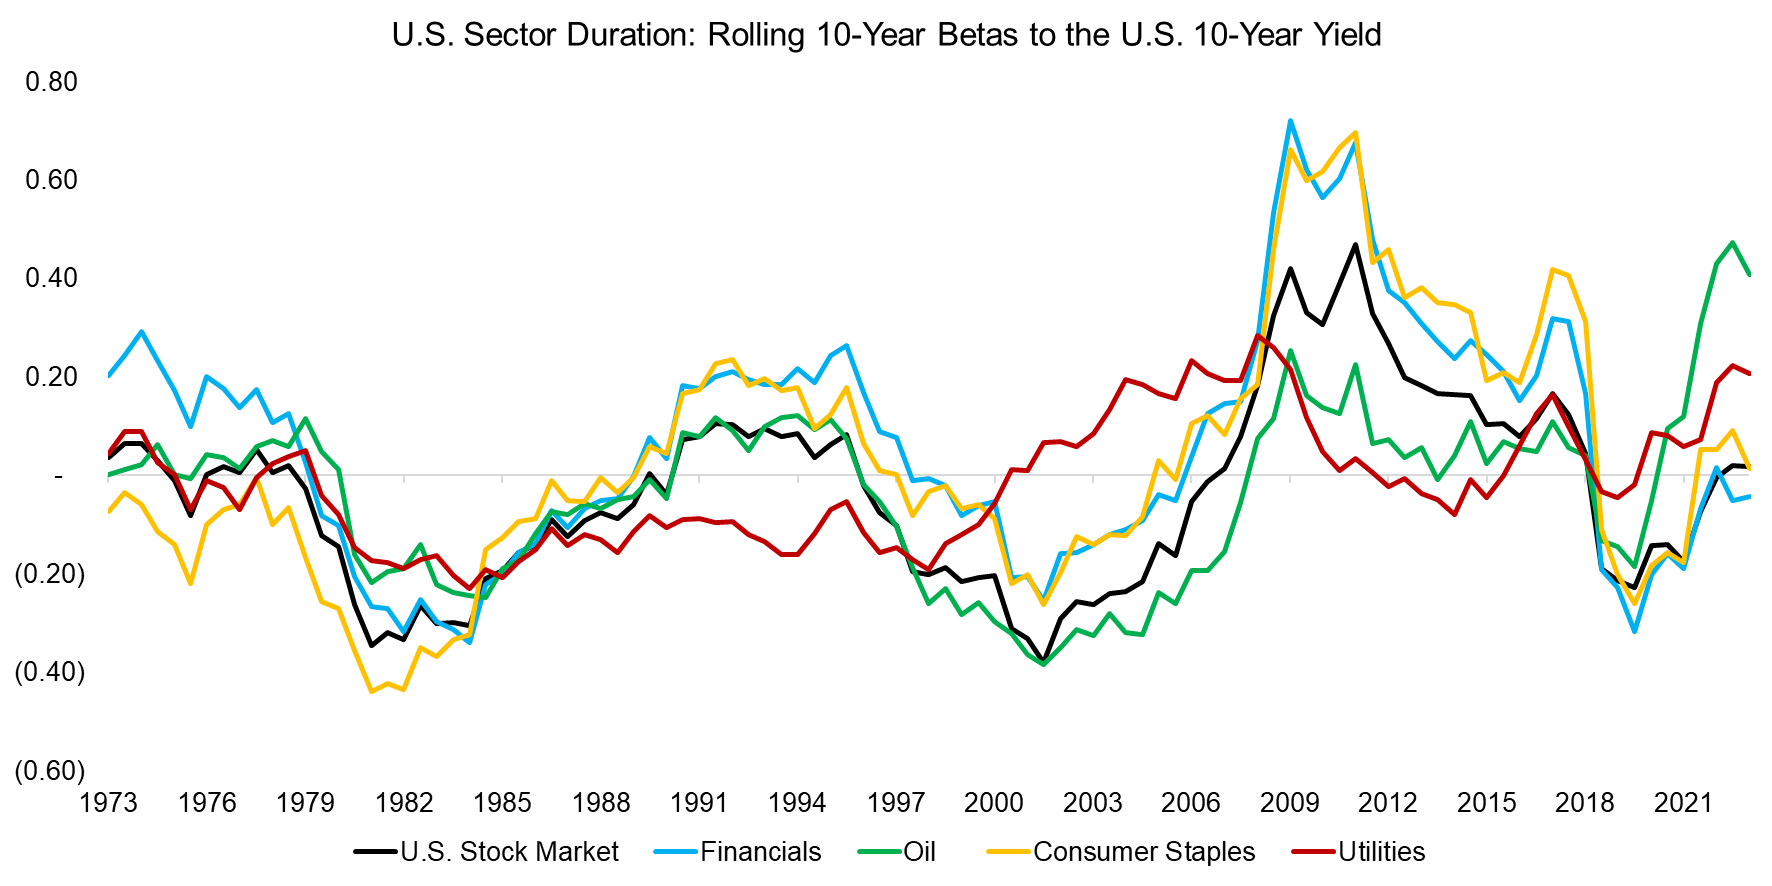 U.S. Sector Duration Rolling 10-Year Betas to the U.S. 10-Year Yield